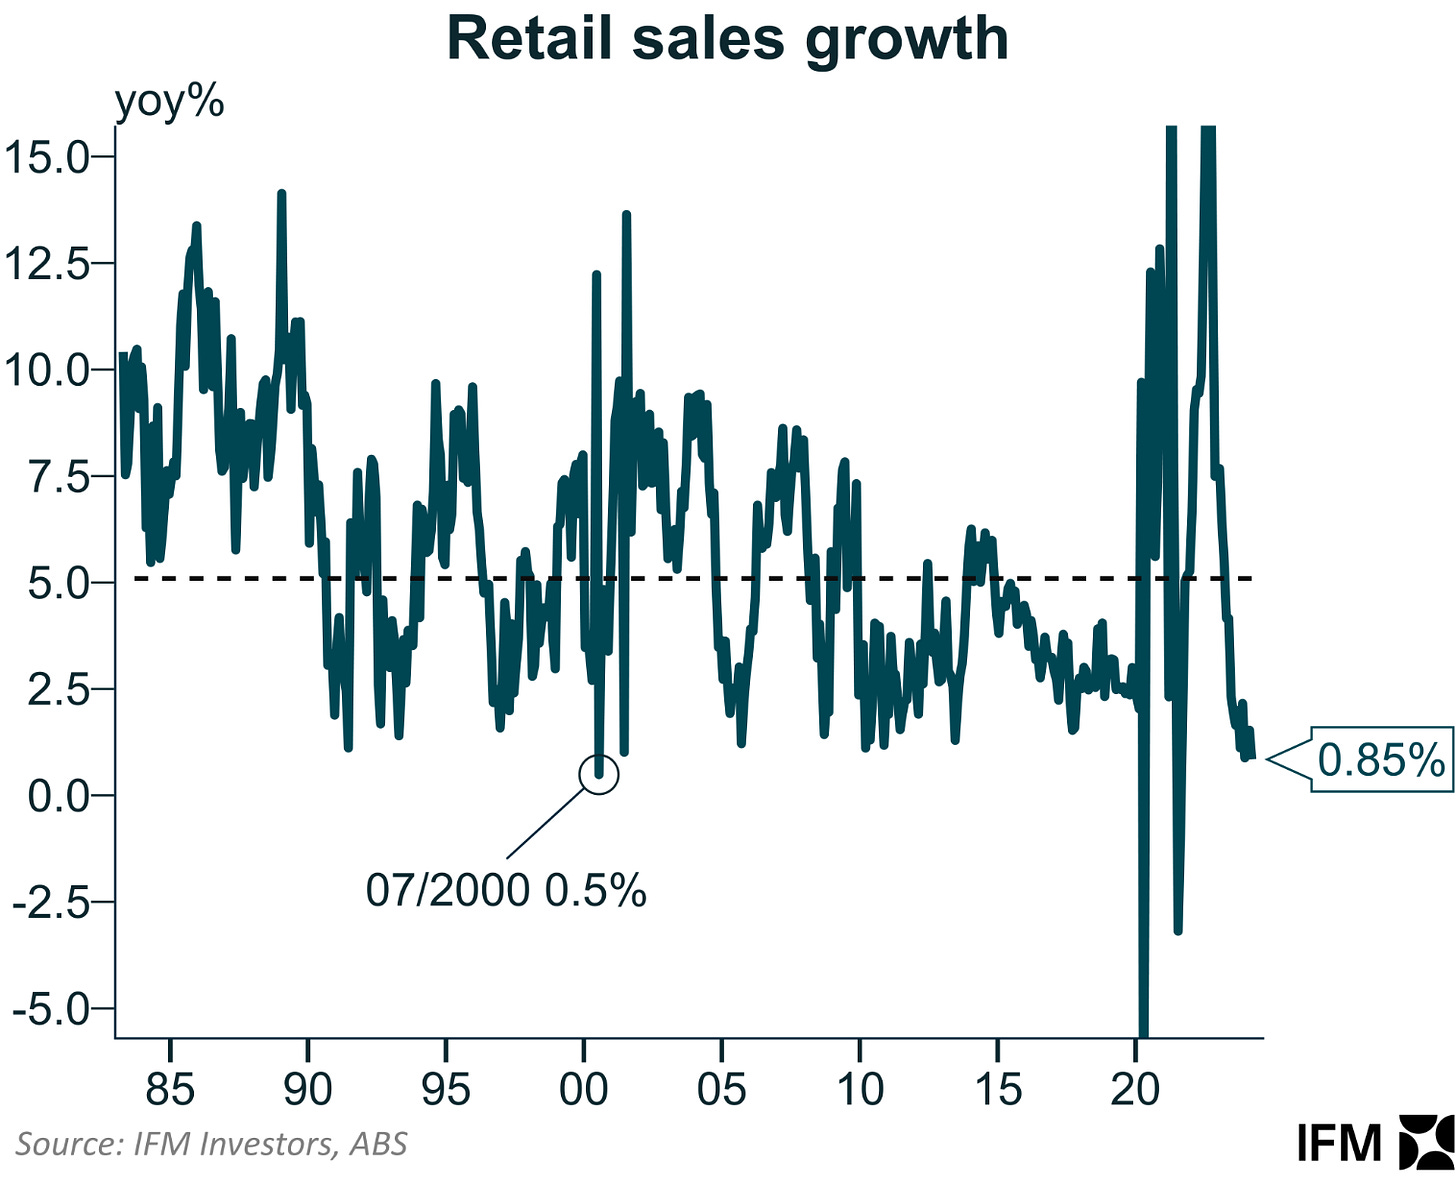 Annual retail sales growth